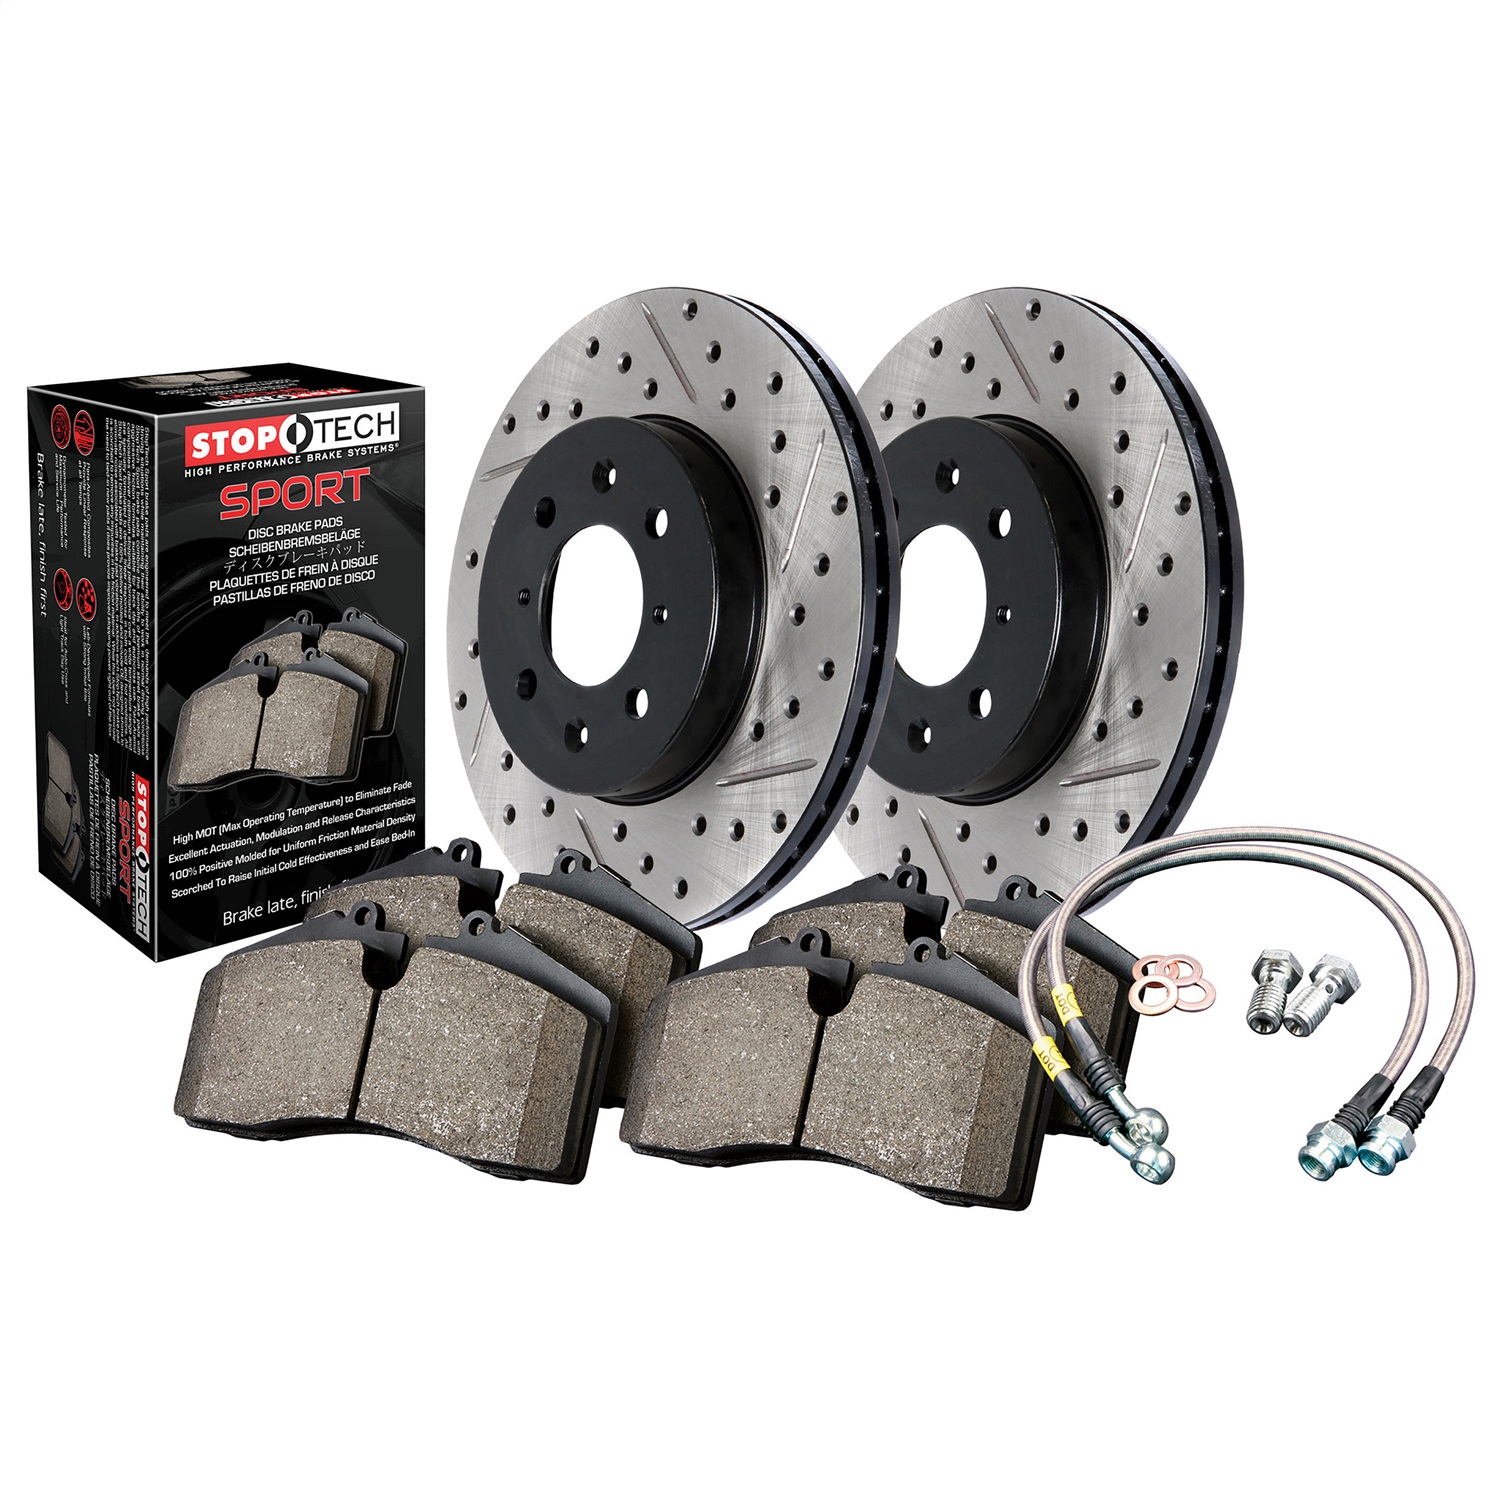 StopTech 978.40035F Sport Disc Brake Kit w/Cross-Drilled And Slotted Rotors